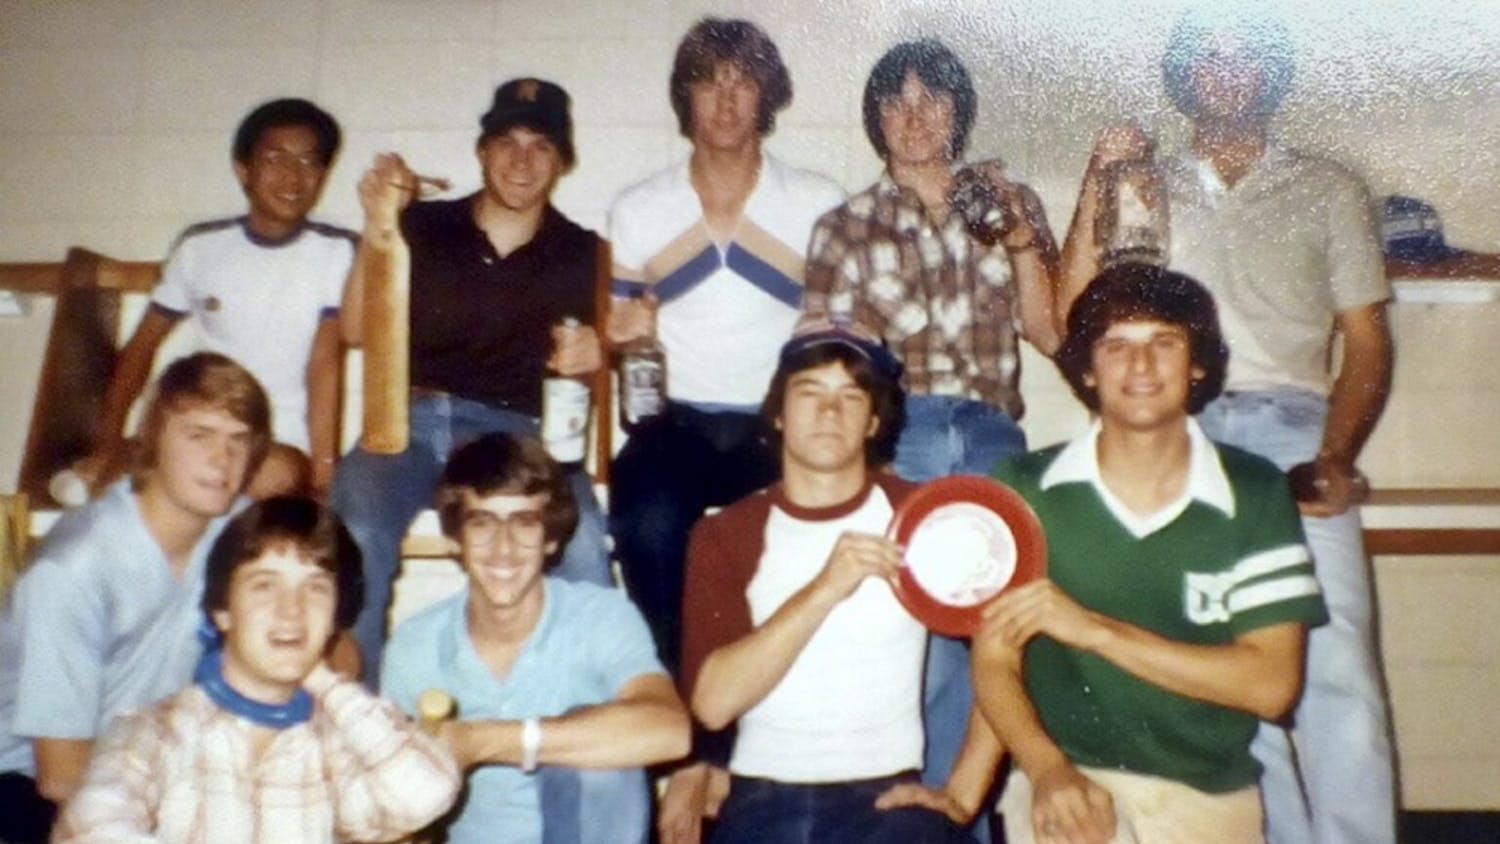 Then-second-year journalism student John Straubinger (kneeling, with glasses) poses with residents of Bates House's fifth floor in 1980.